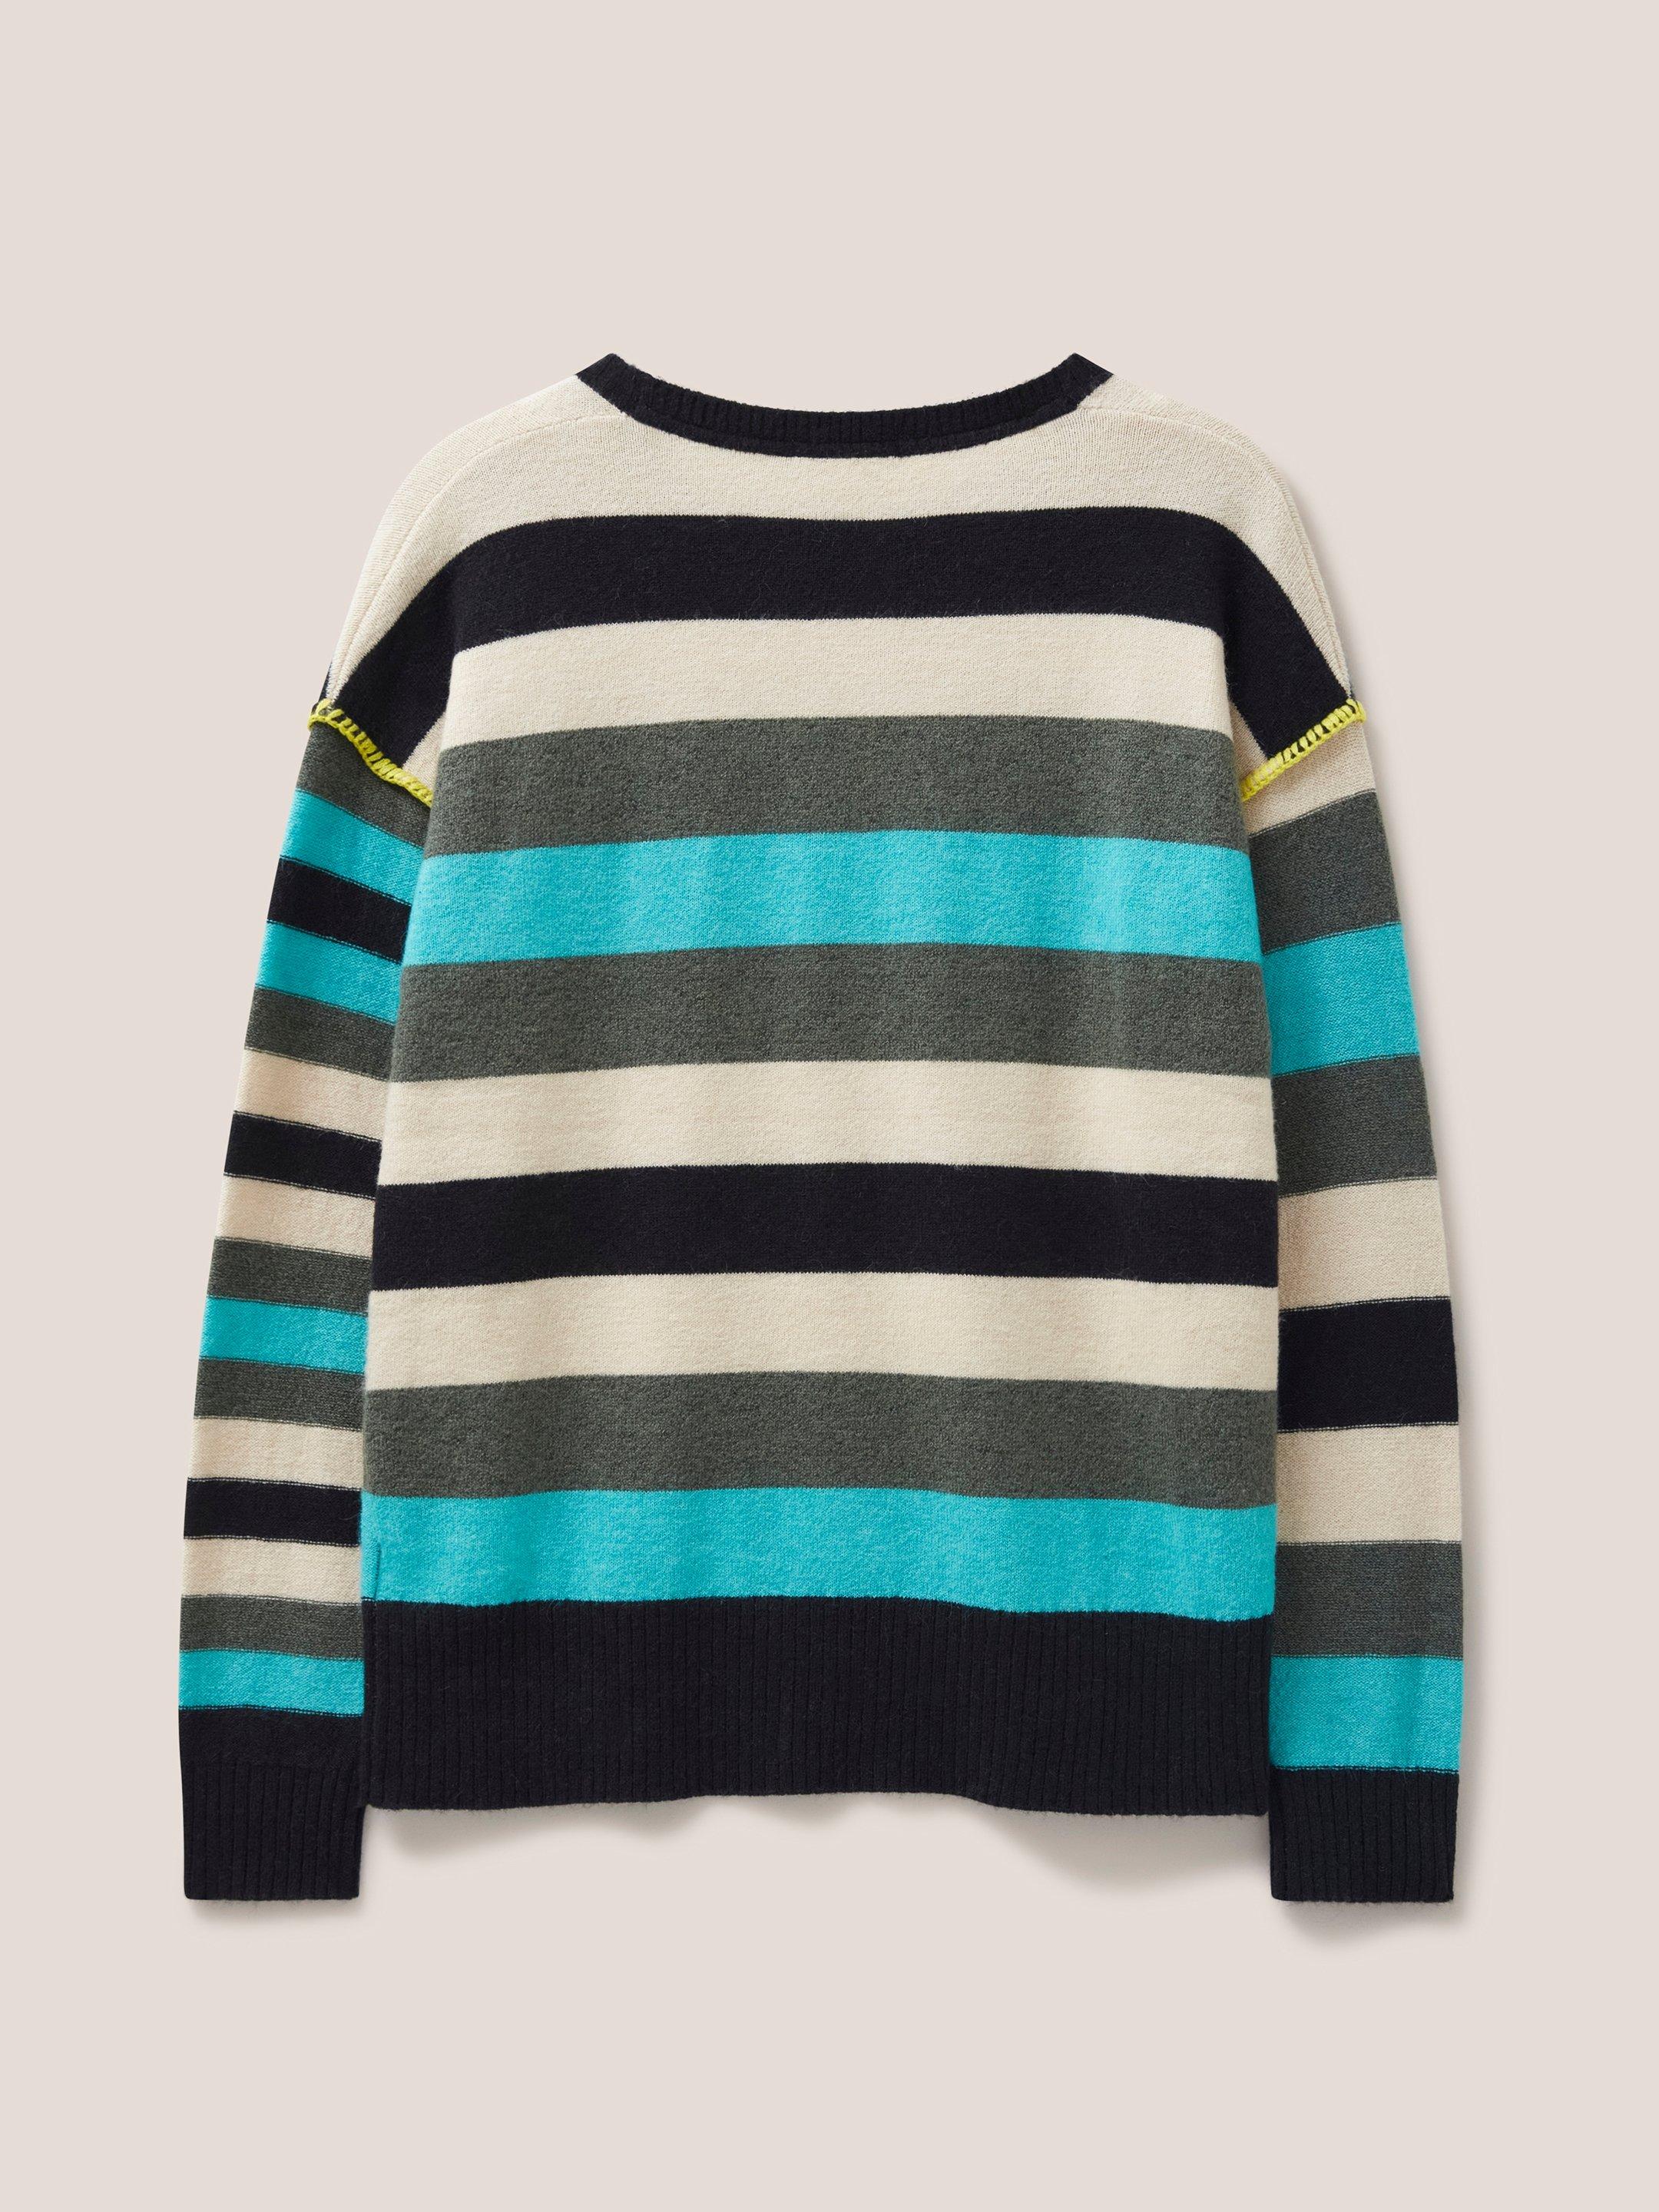 RIPPLE KNITTED CREW NECK JUMPER in BLUE MLT - FLAT BACK